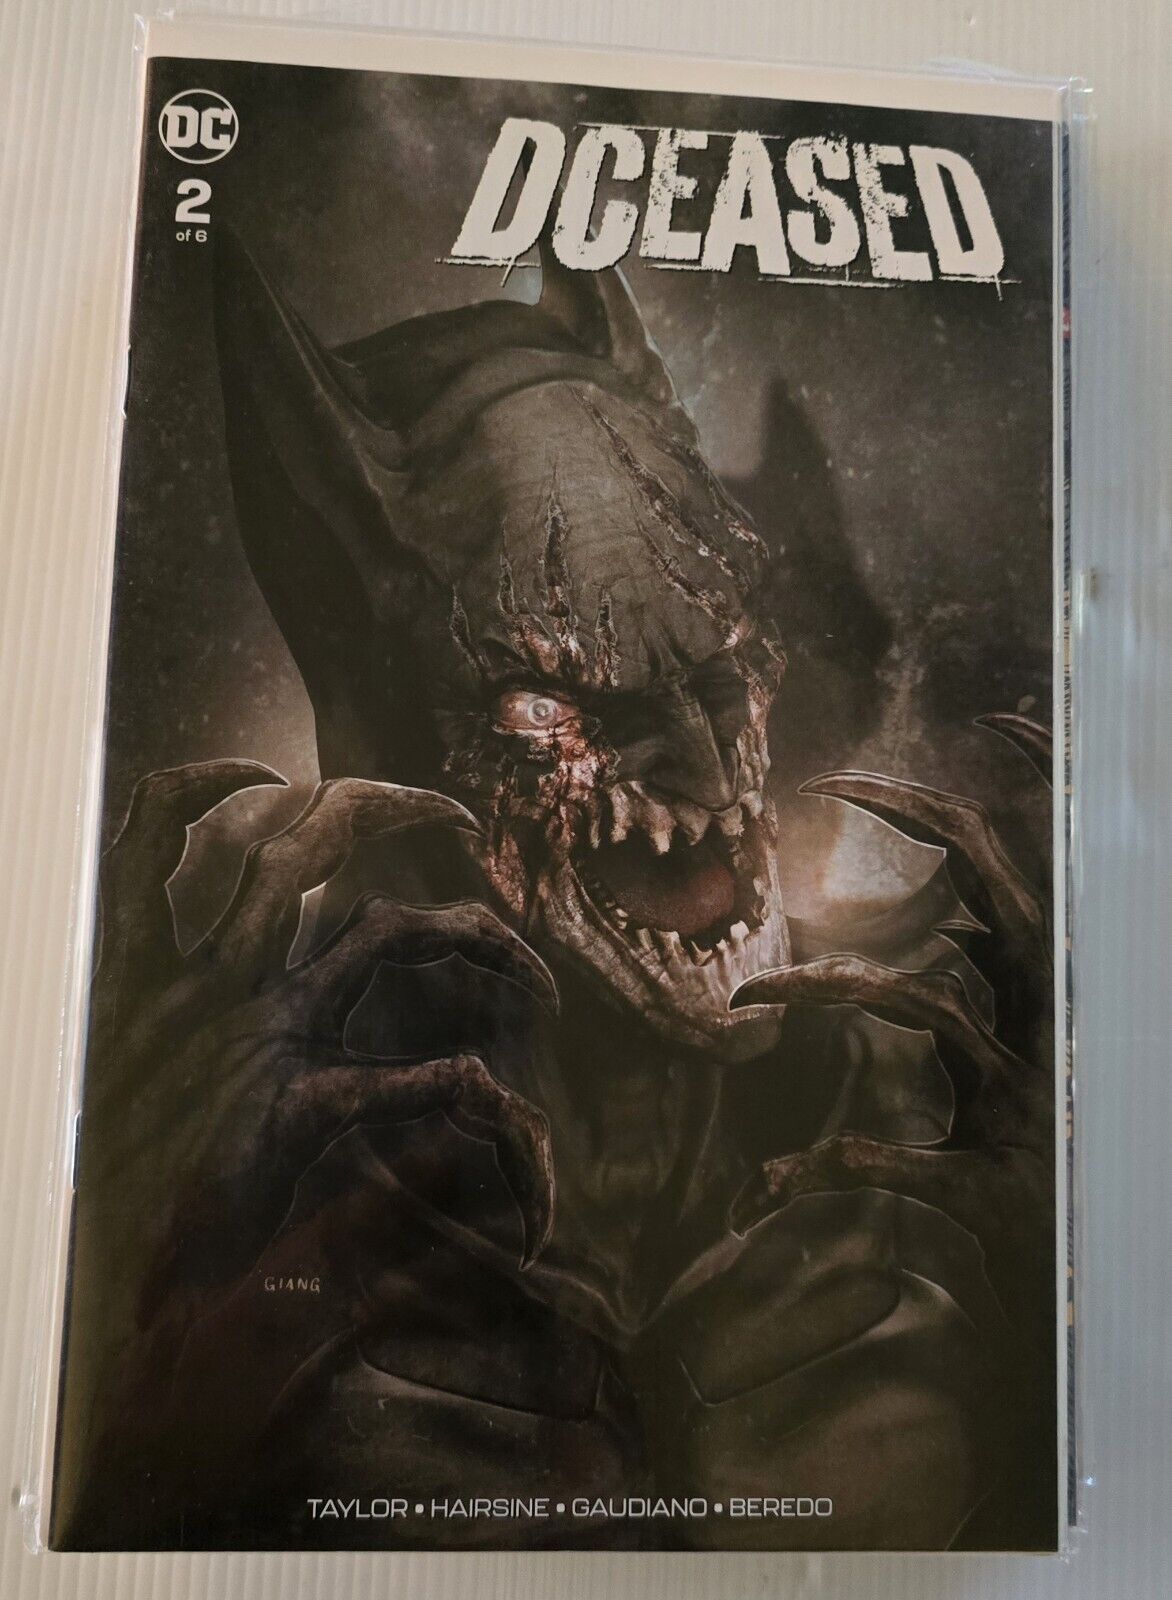 DCEASED #2 - Comics Elite Exclusive - Giang Minimal Trade Dress Variant Cover